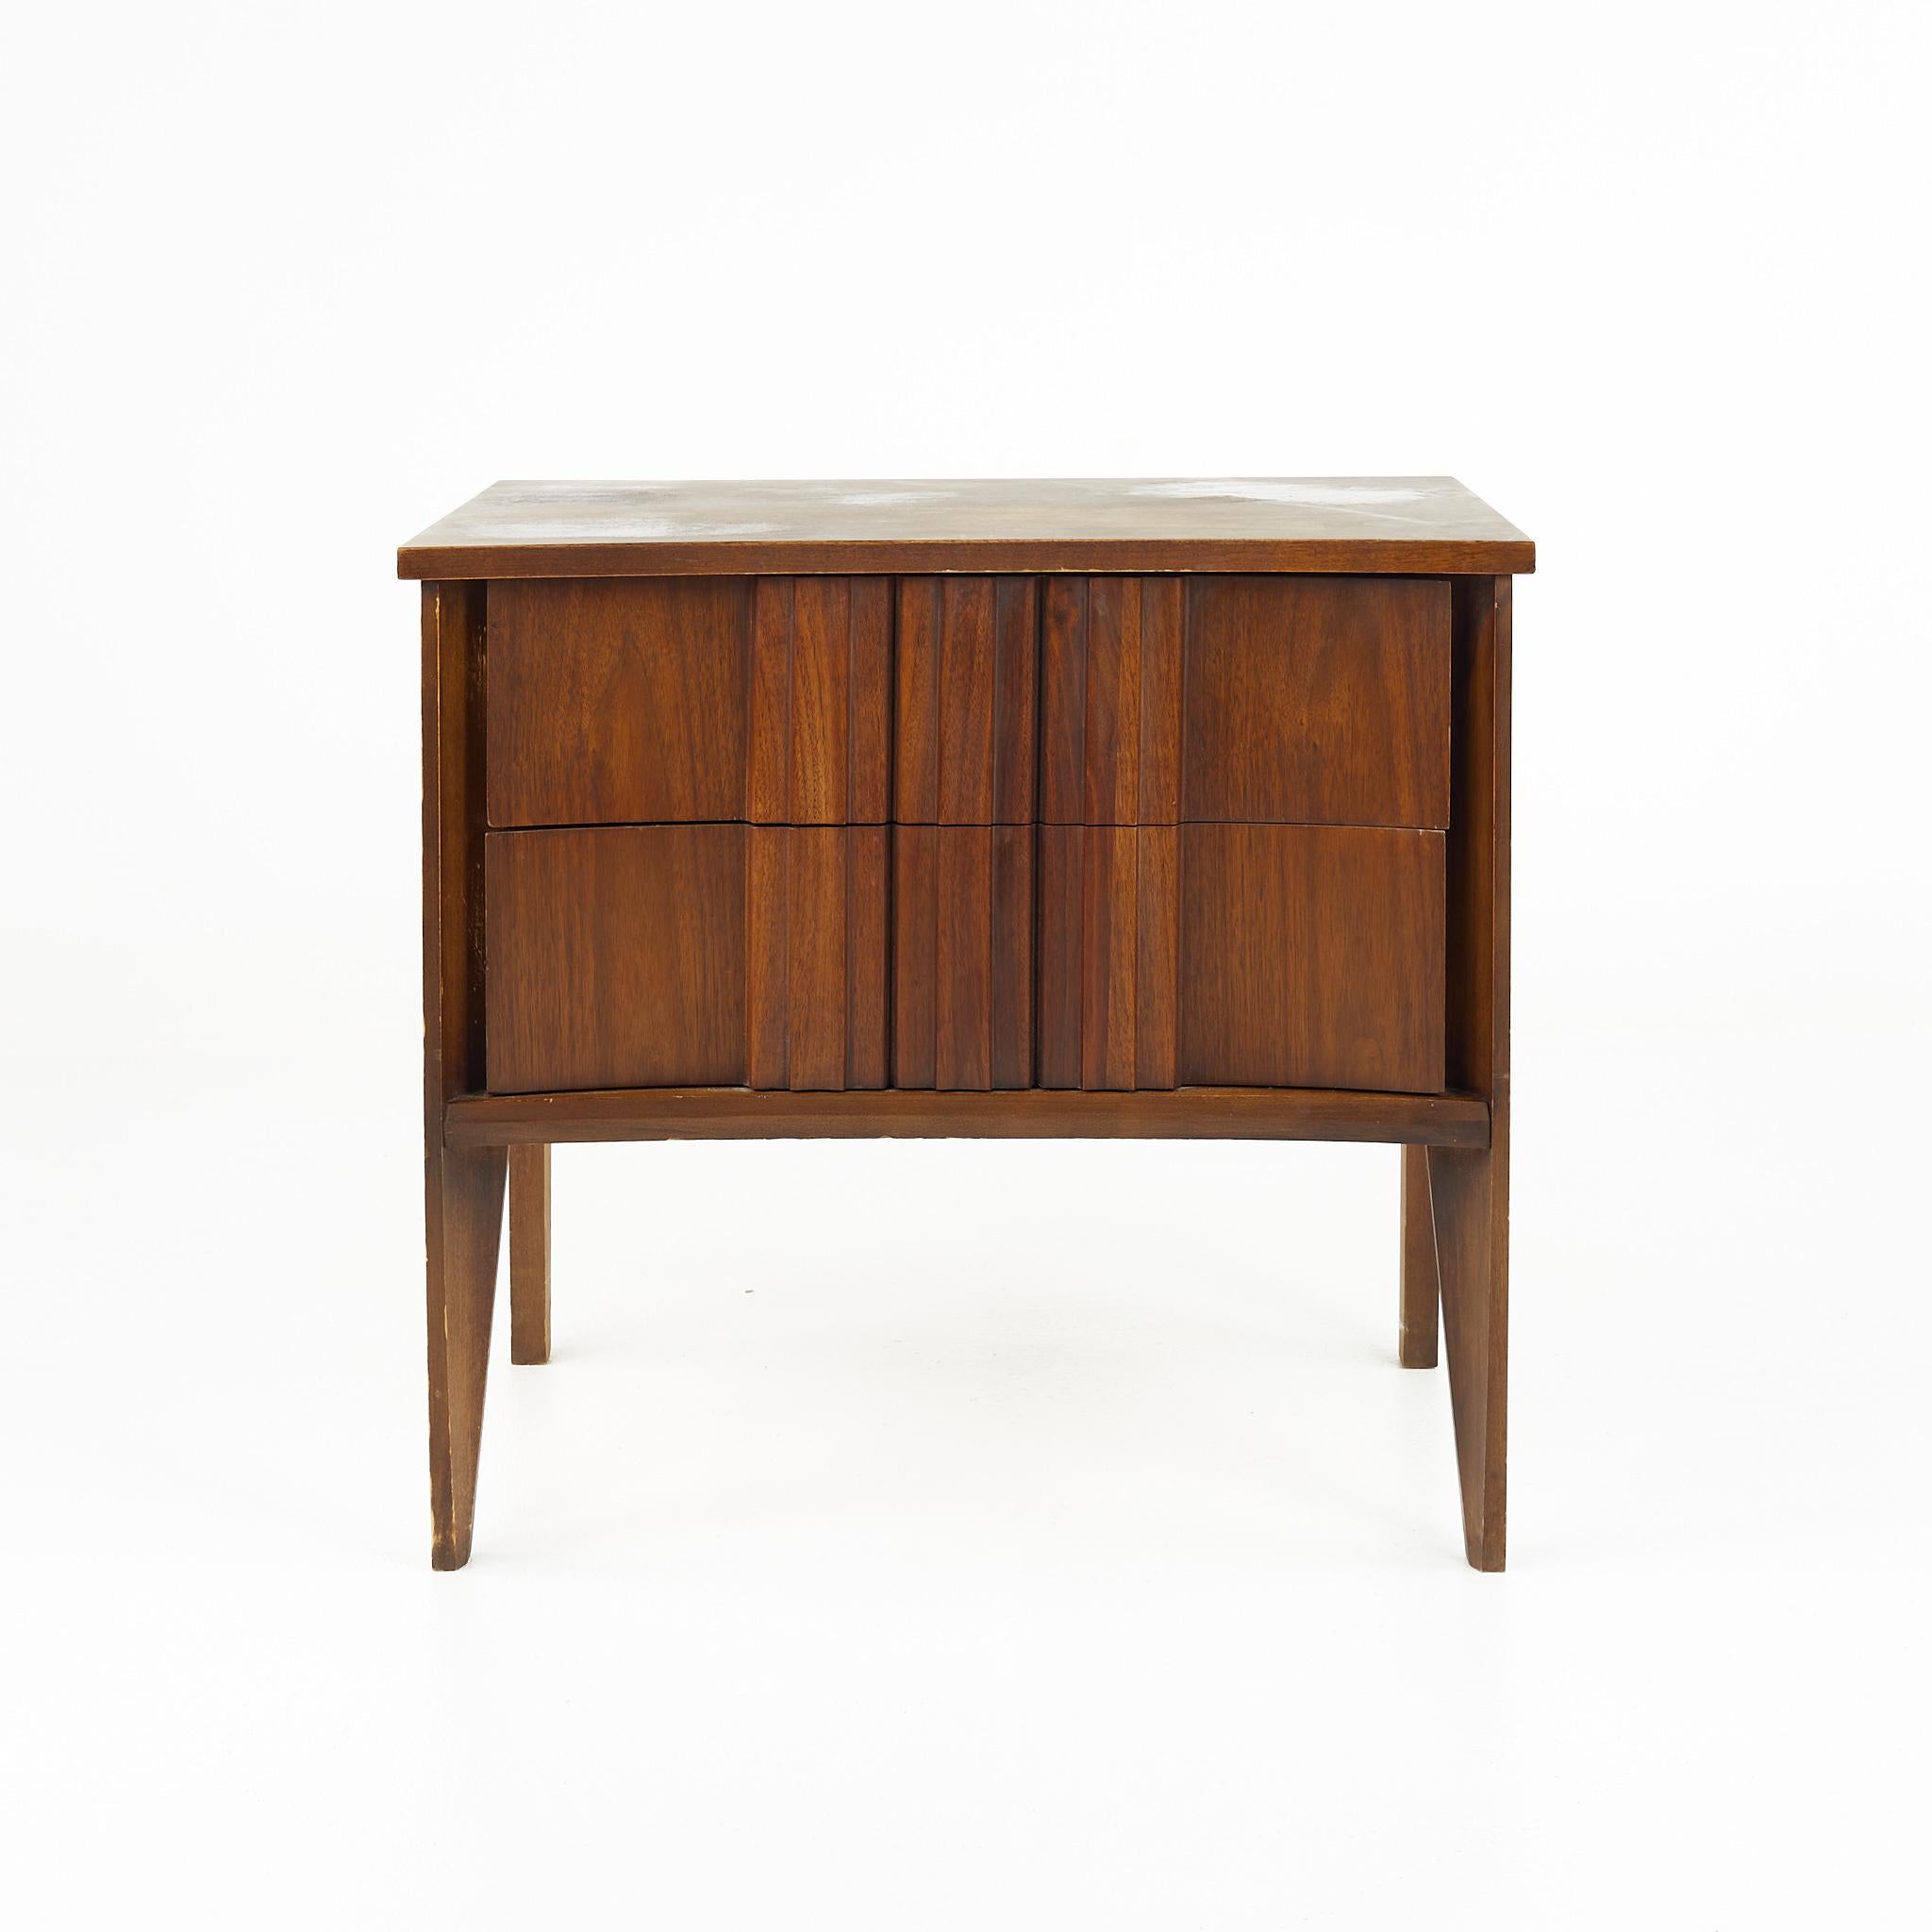 Thomasville style mid century Brutalist walnut nightstand

This nightstand measures: 25 wide x 16 deep x 23 inches high

?All pieces of furniture can be had in what we call restored vintage condition. That means the piece is restored upon